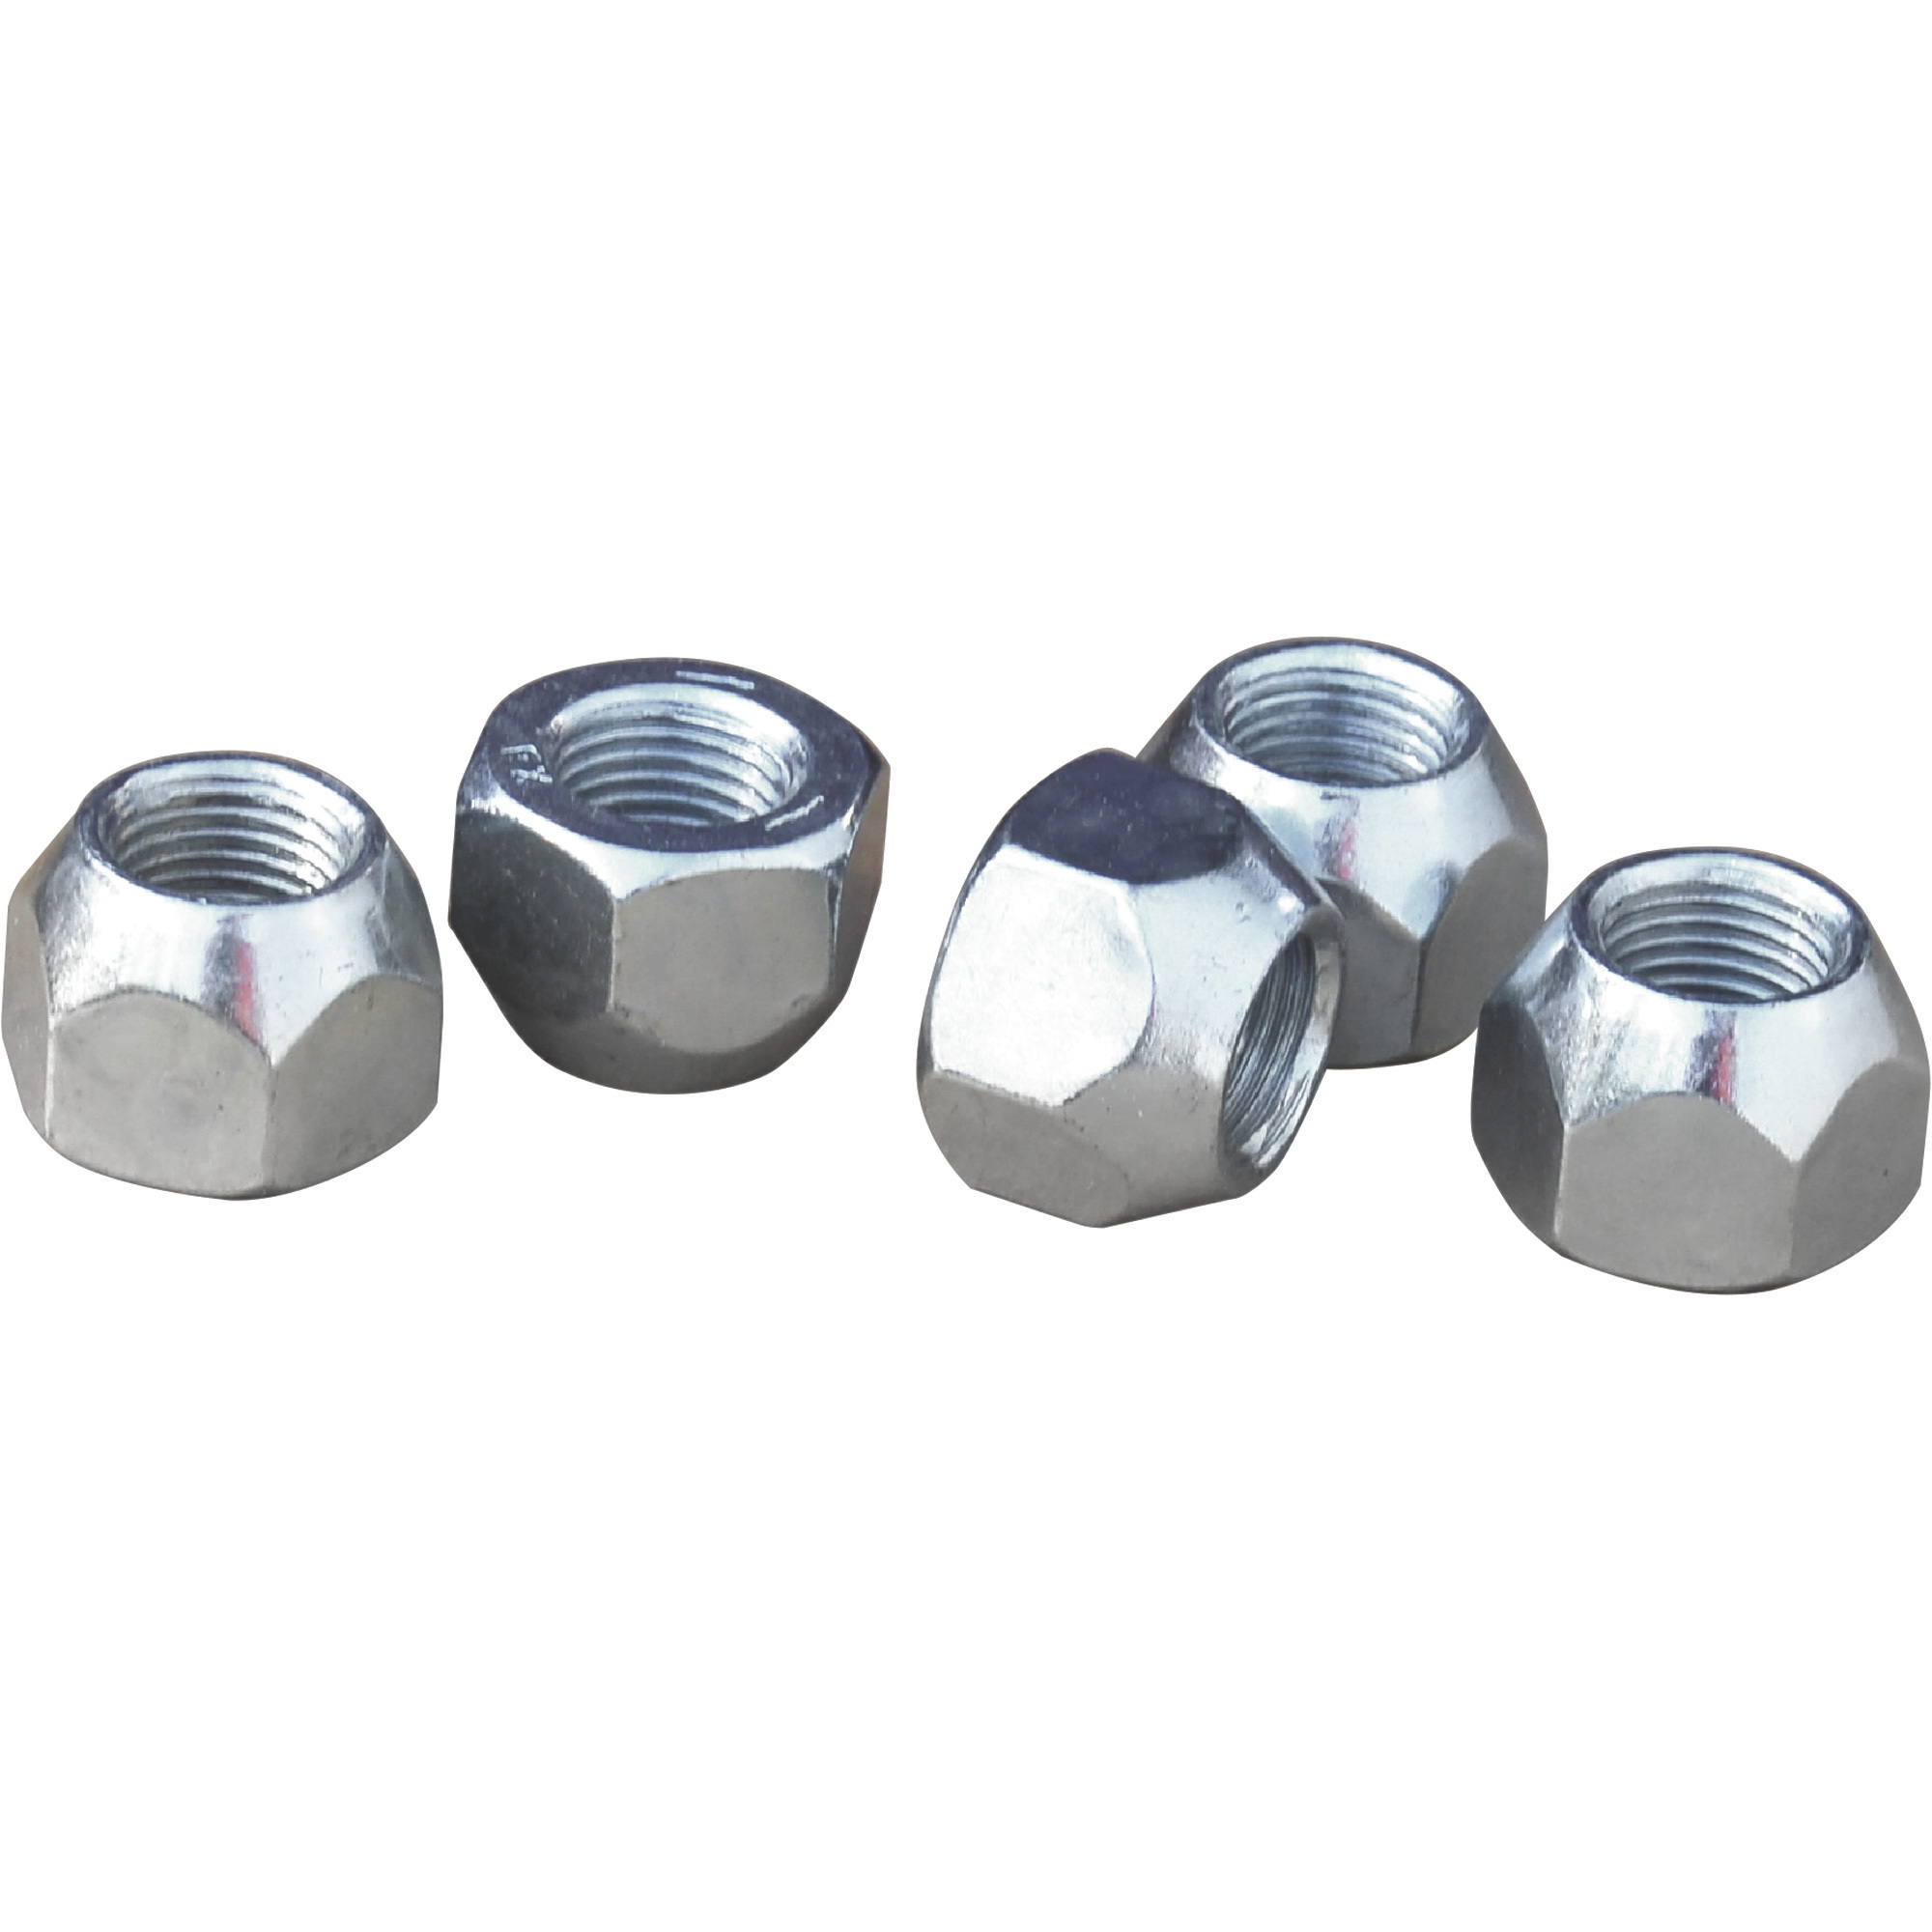 Ultra-Tow 5-Pack Trailer Lug Nuts